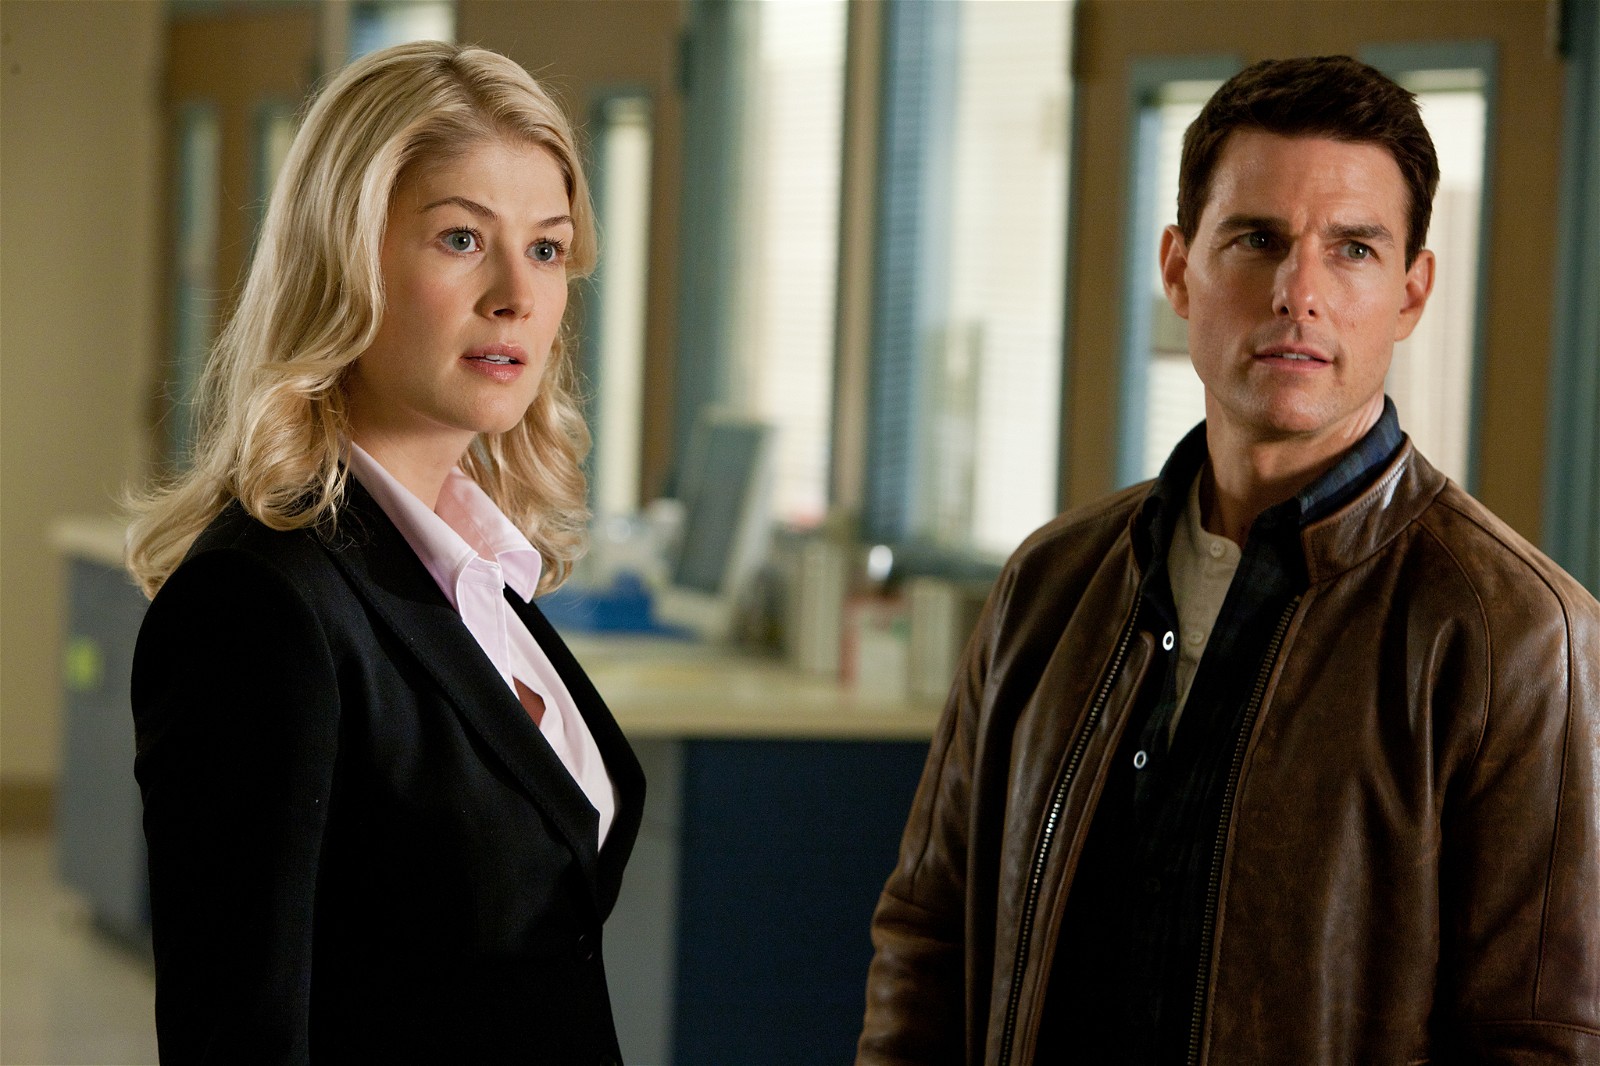 Rosamund Pike and Tom Cruise in Jack Reacher